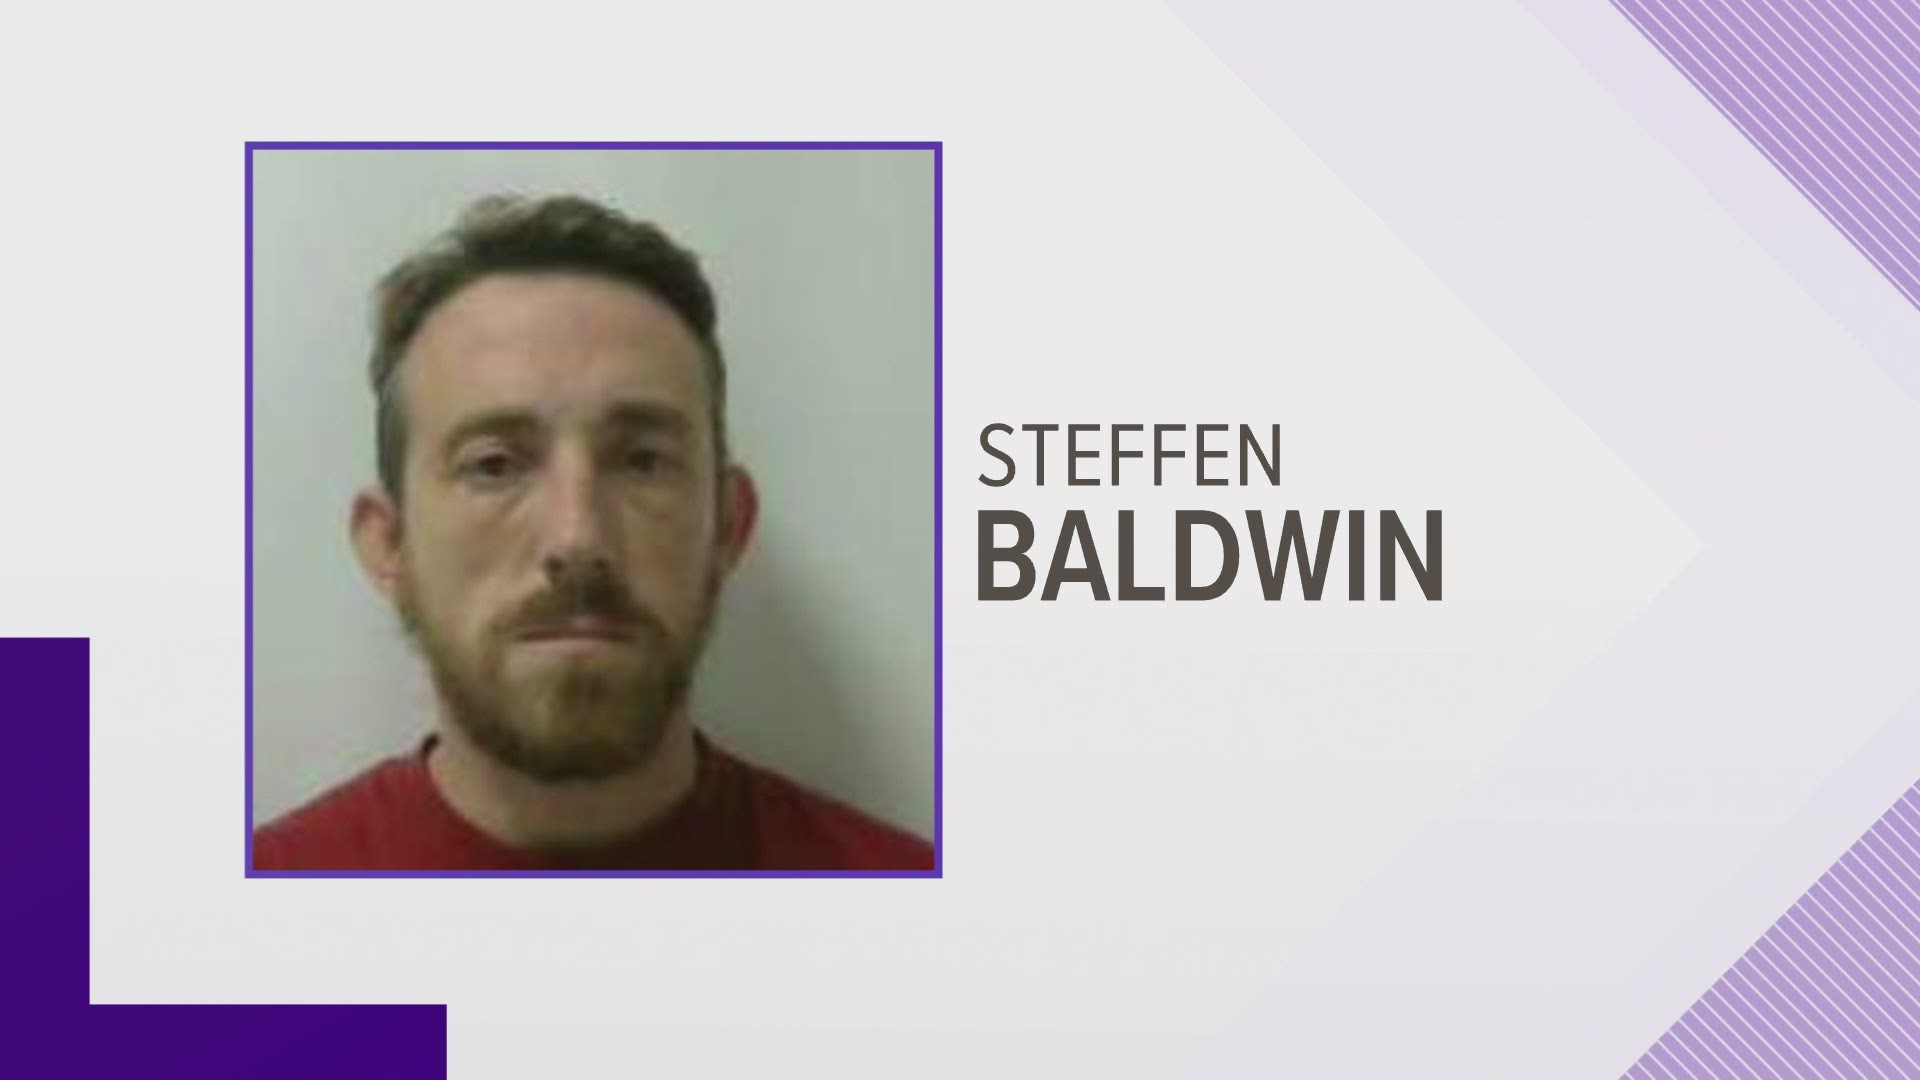 Steffen Baldwin appeared in court Wednesday to face 42 charges.